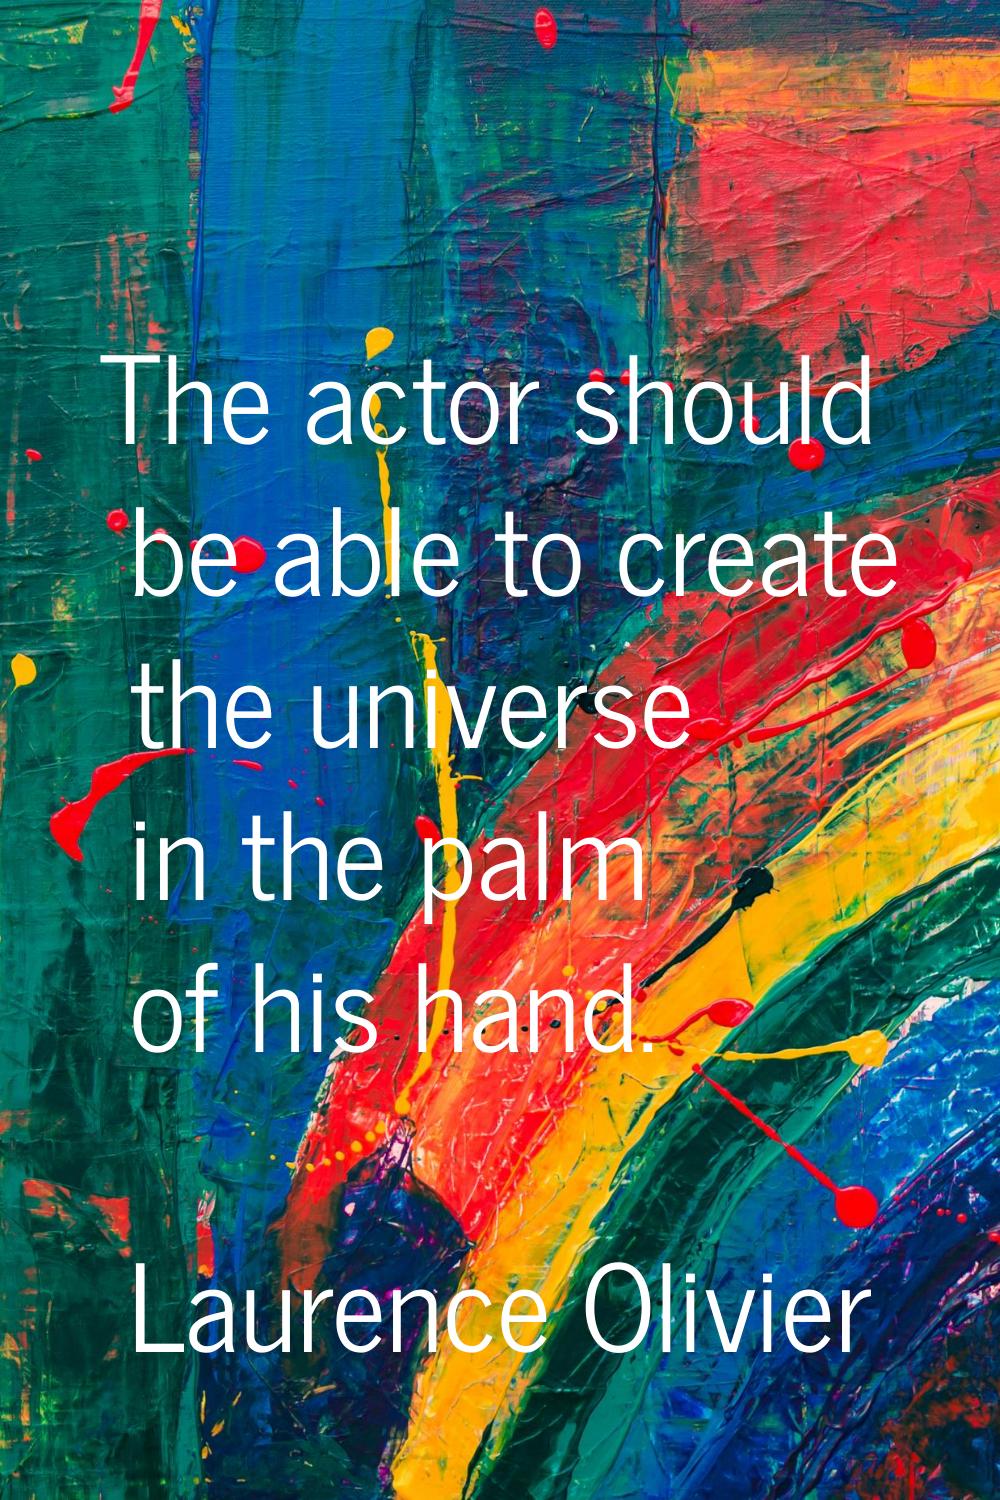 The actor should be able to create the universe in the palm of his hand.